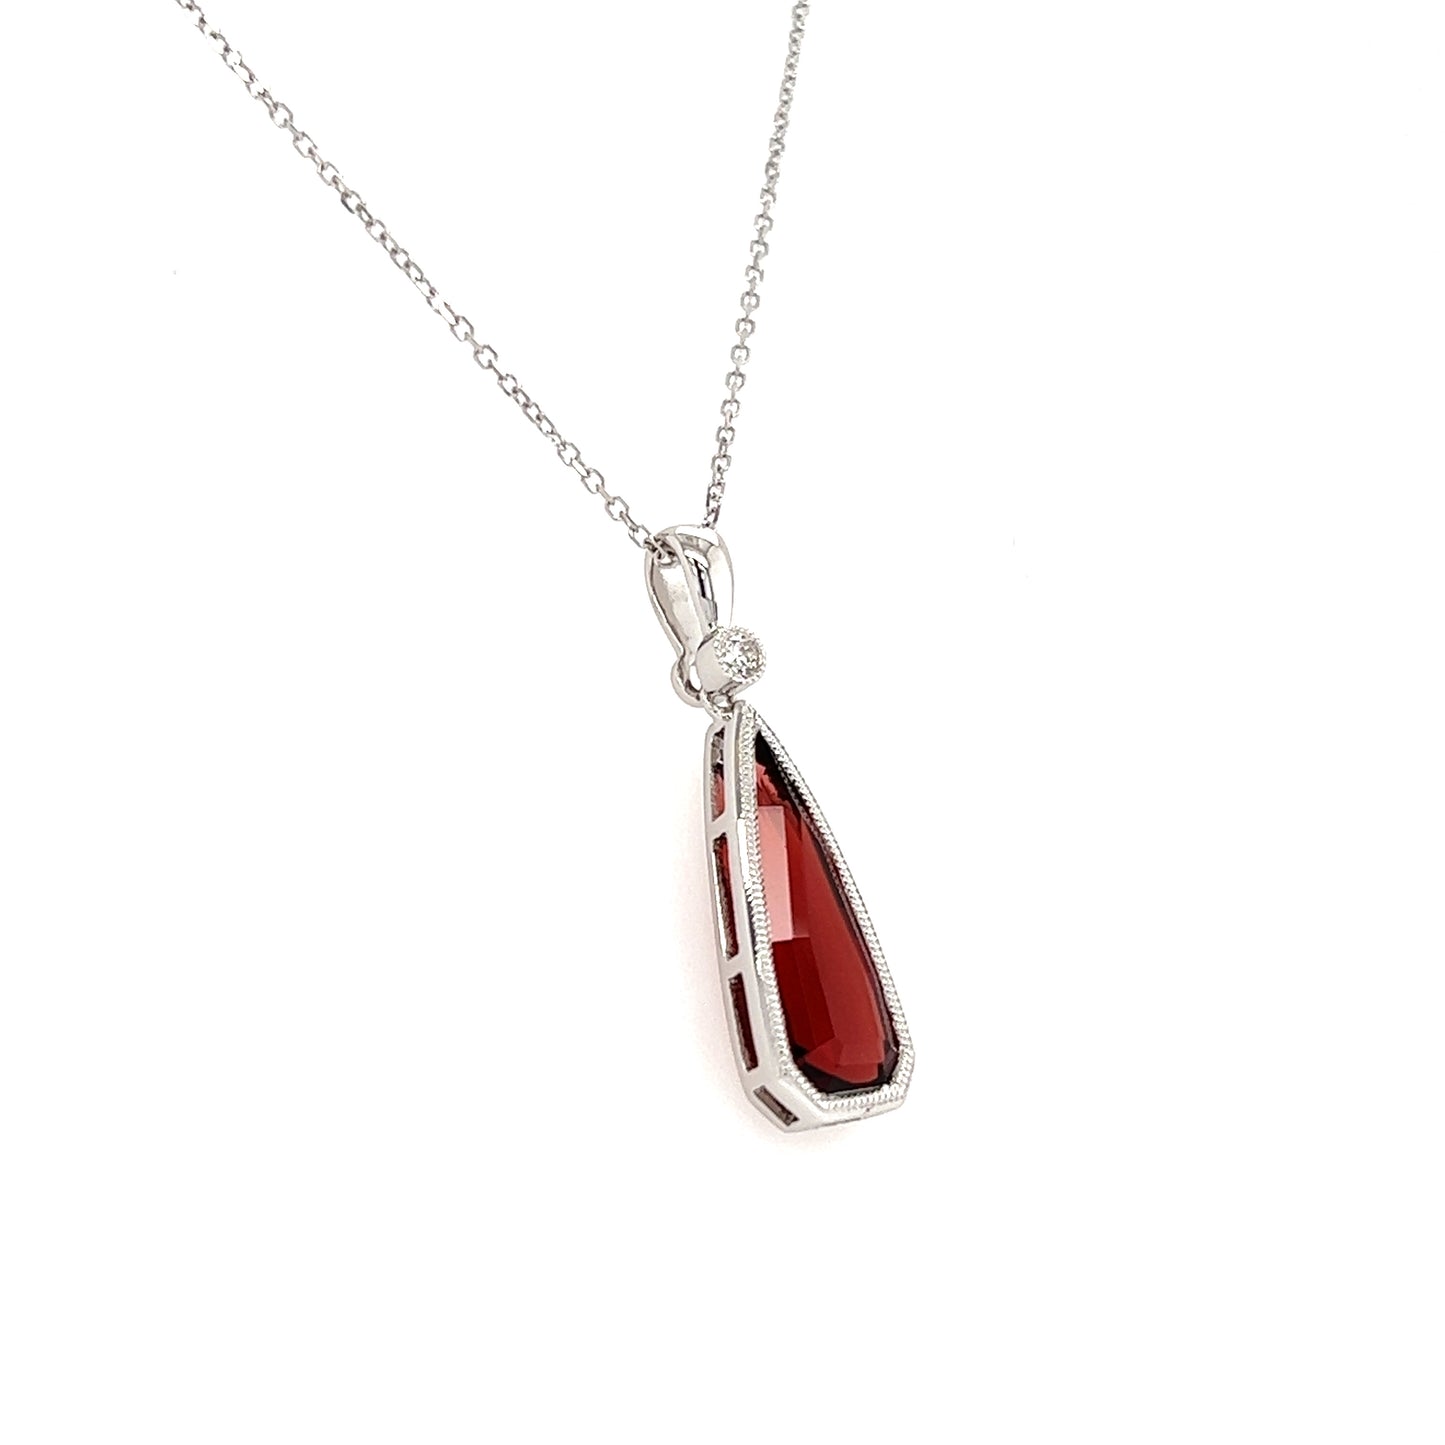 Irregular Garnet Pendant with Diamonds Accent in 14K White Gold Pendant and Chain Right Side View